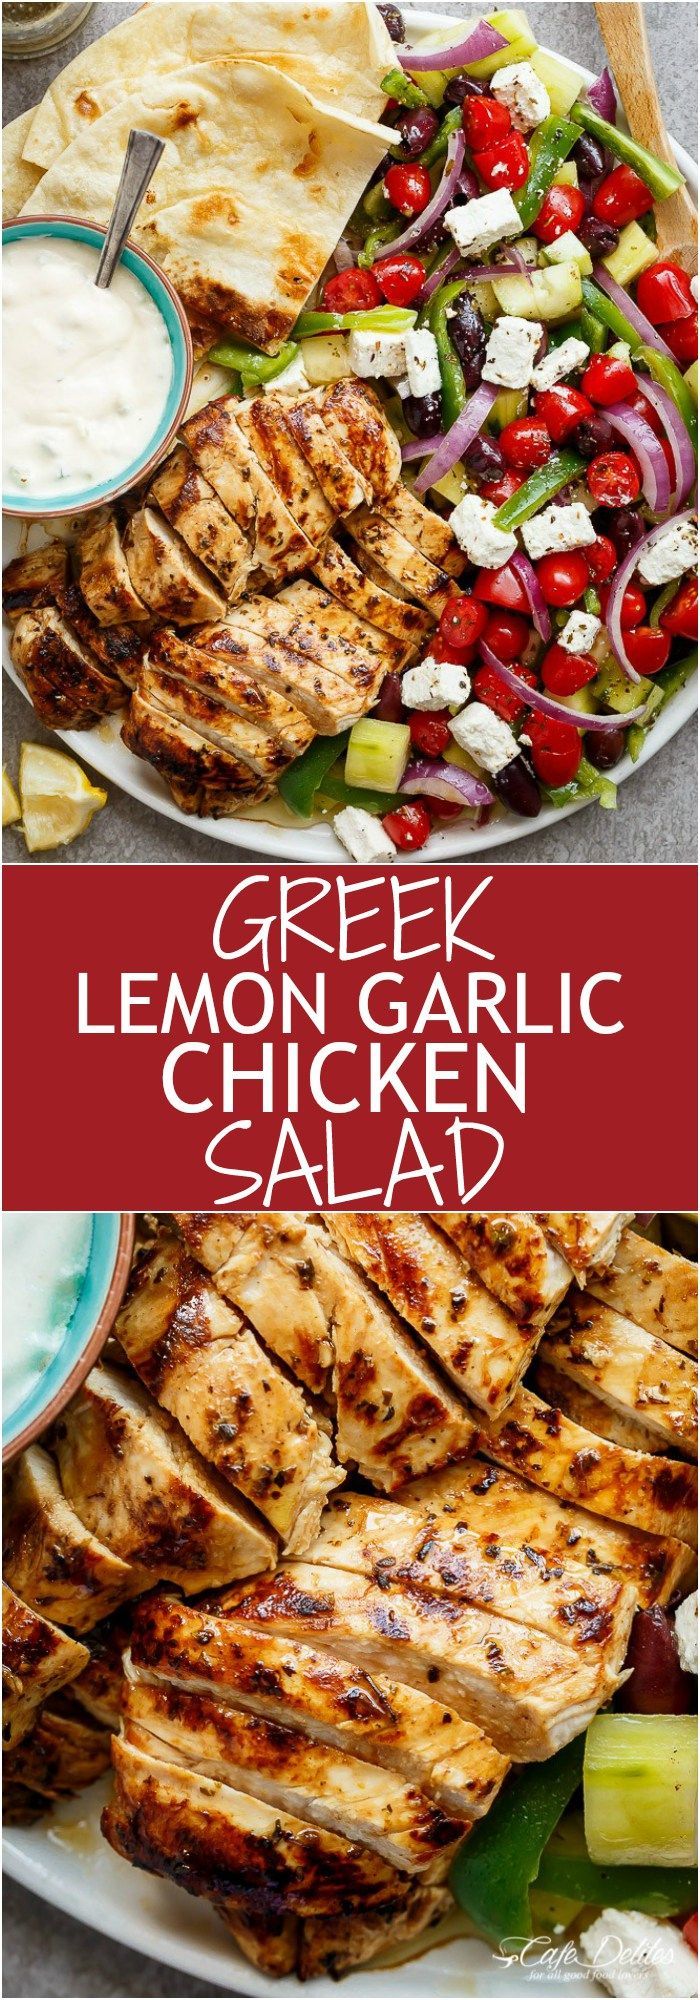 Greek Lemon Garlic Chicken Salad with an incredible dressing that doubles as a marinade! Complete with